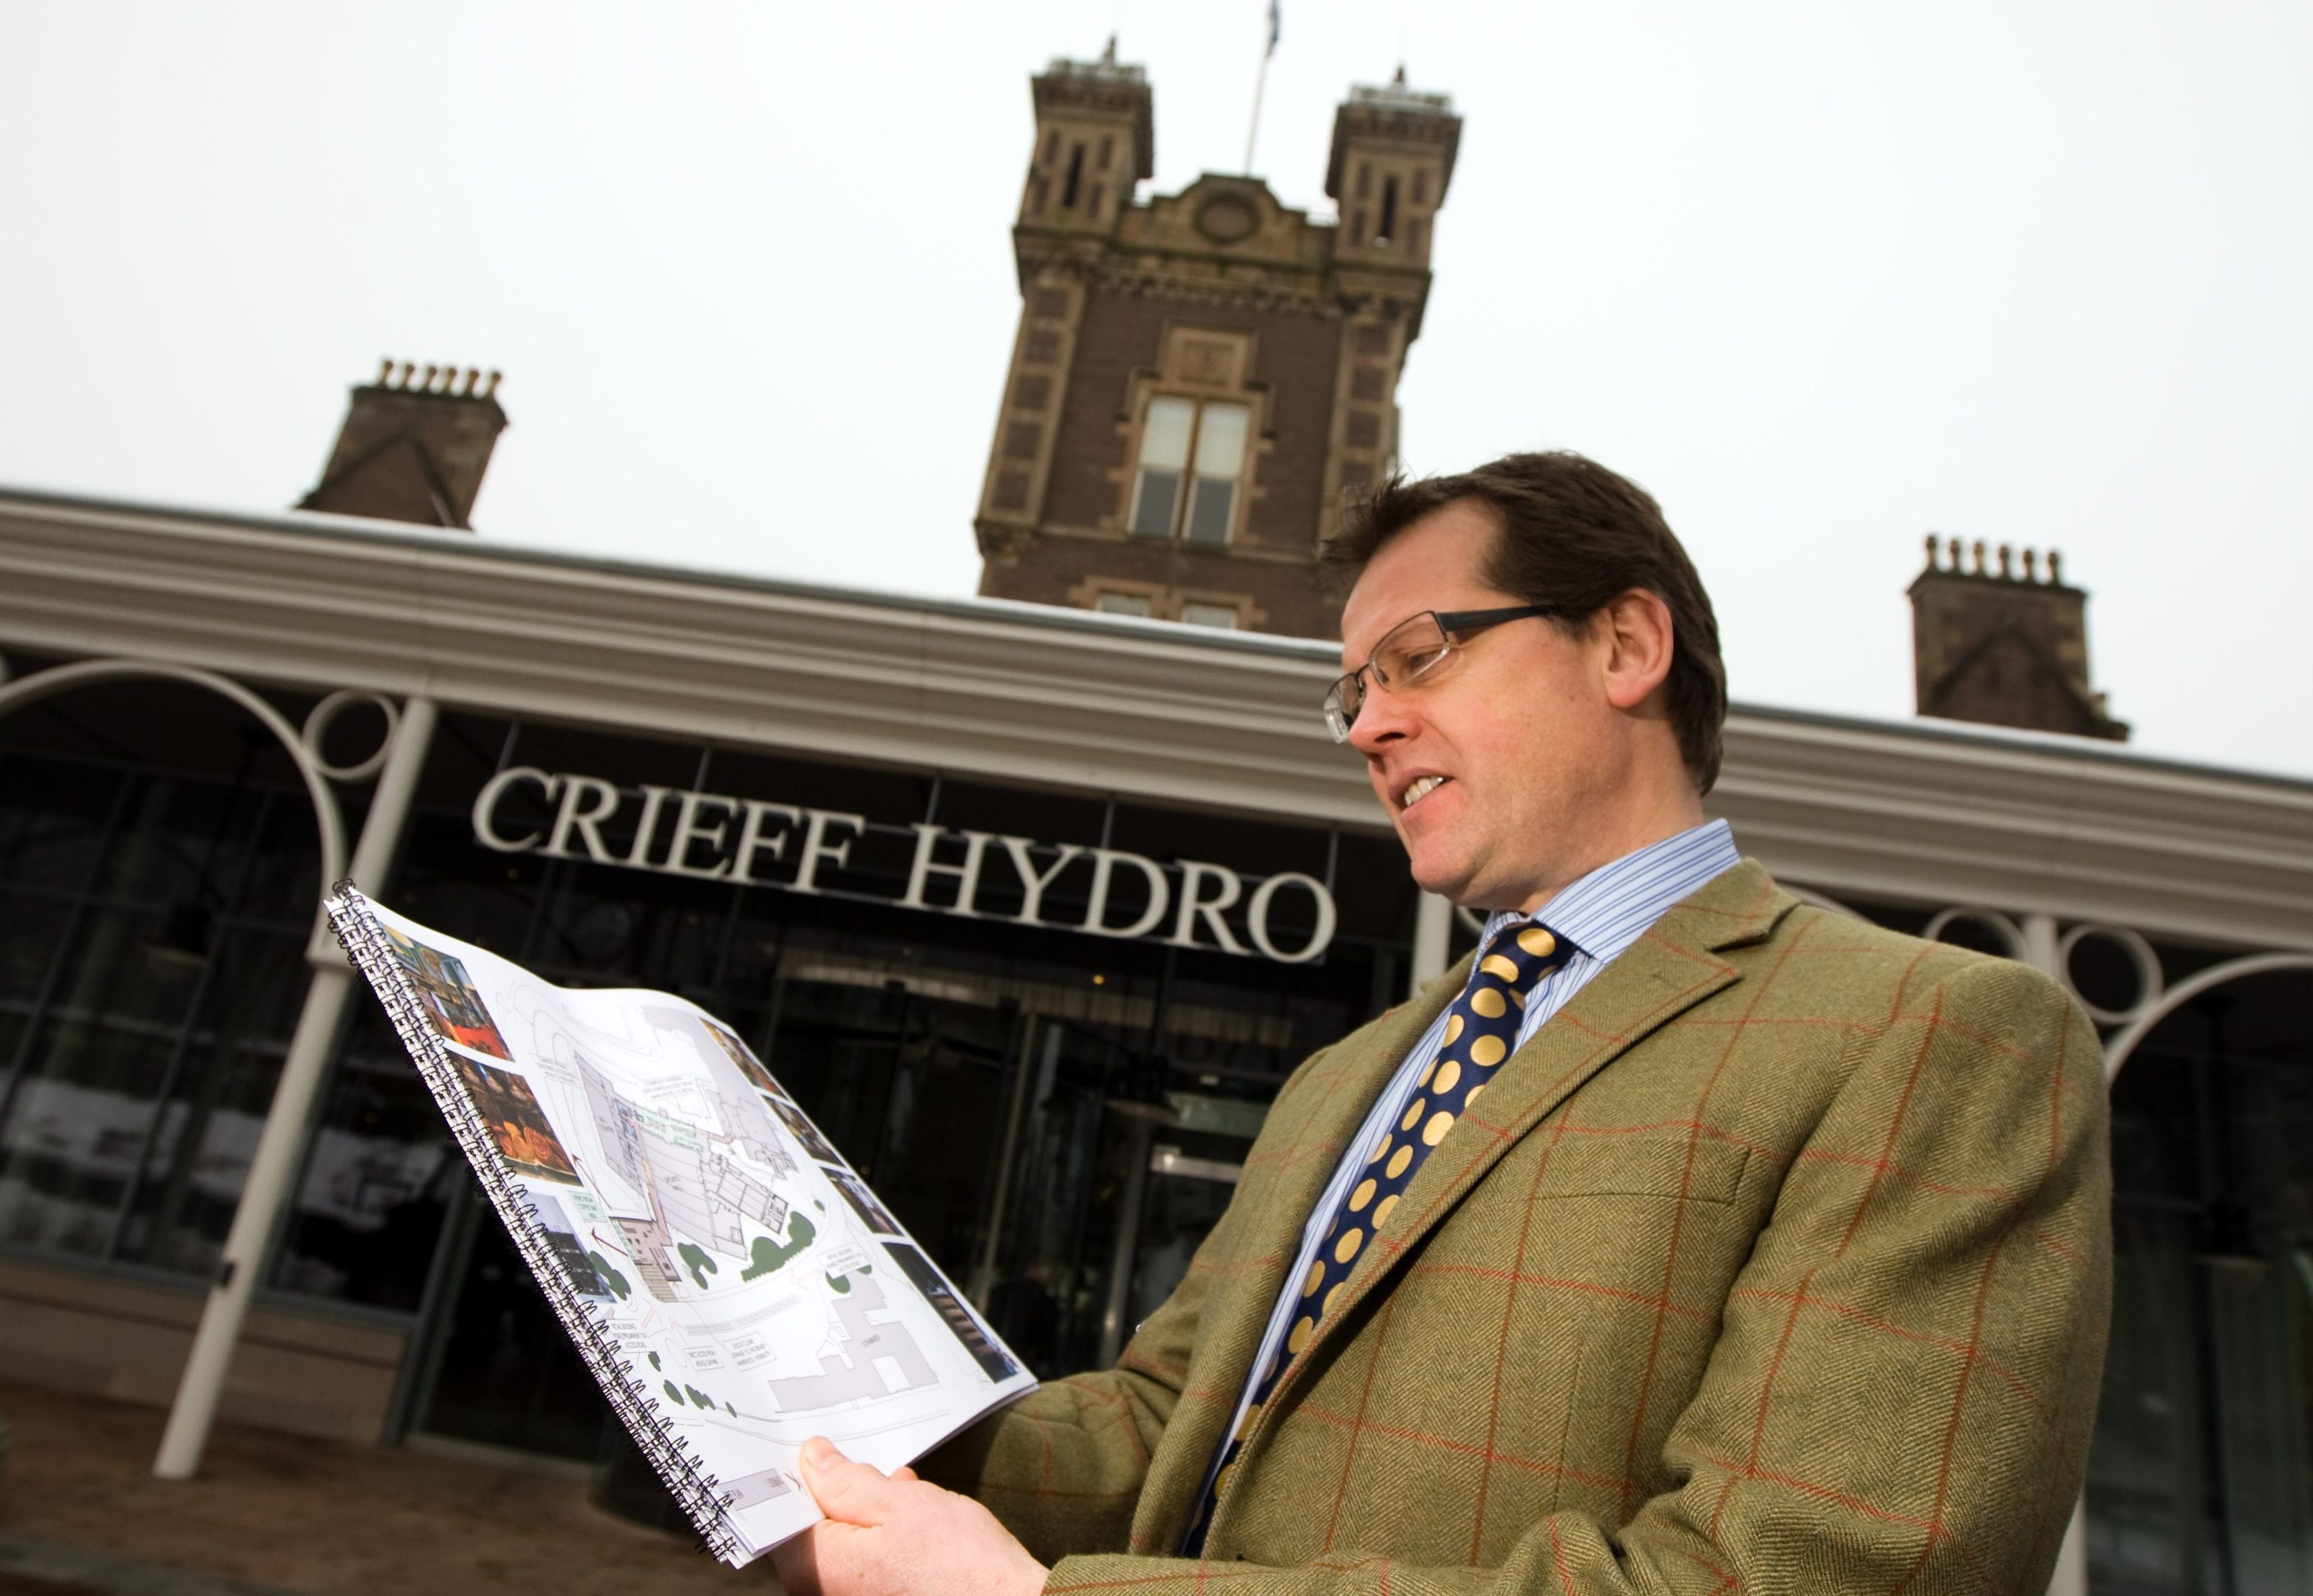 Stephen Leckie with plans for Crieff Hydro East.